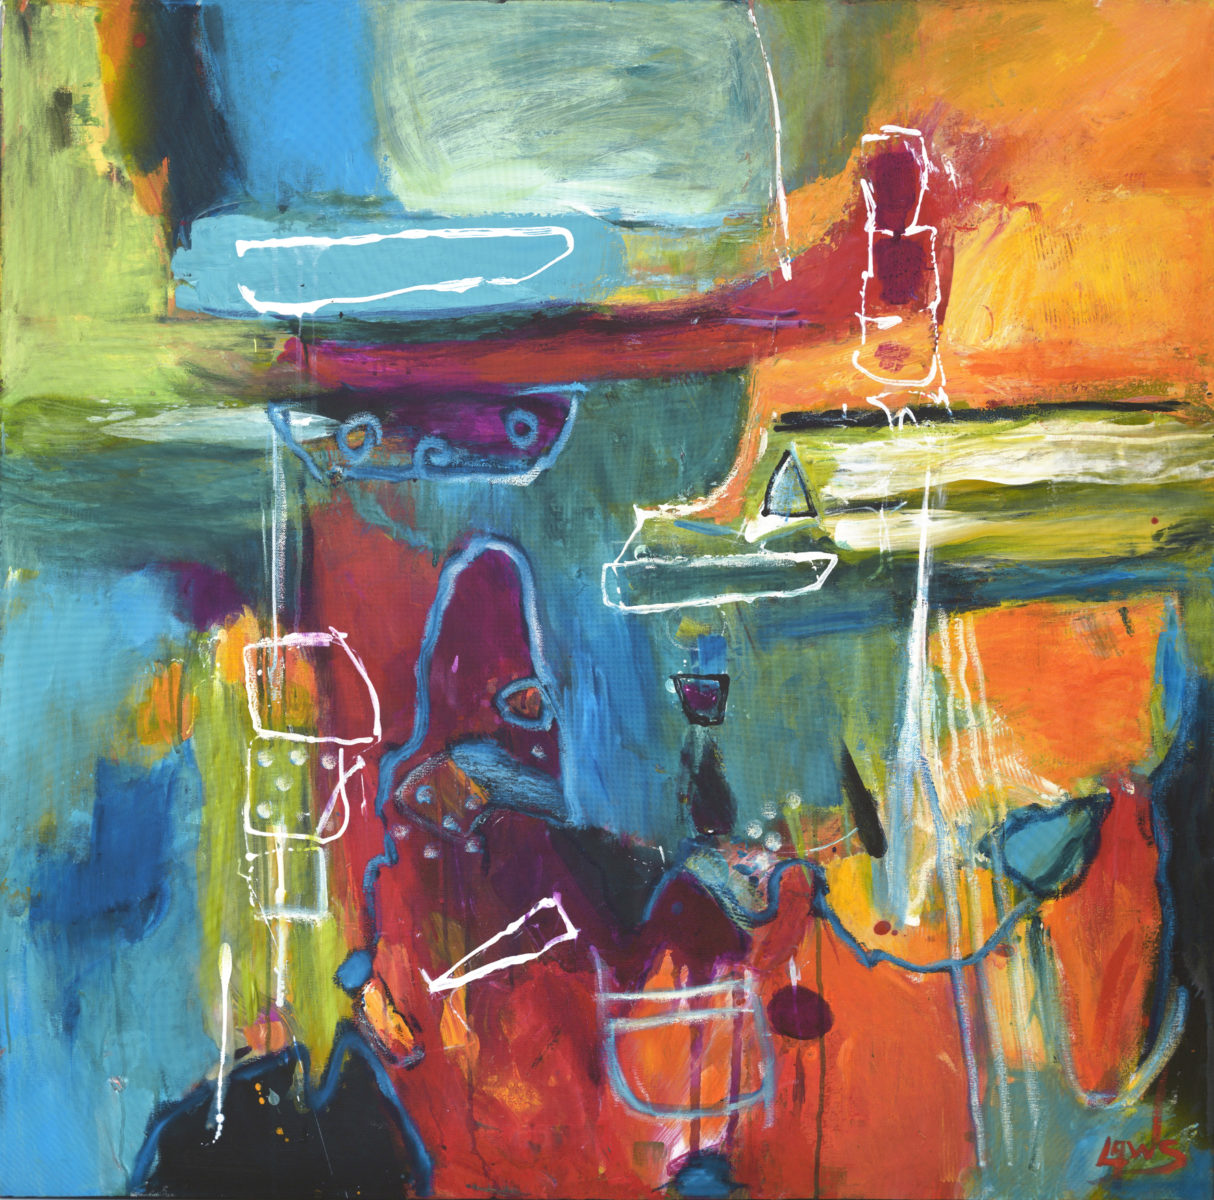 Time for a cruise | Judith Laws | Acrylic and oil sticks on canvas | 100 x 100 cm | $3200